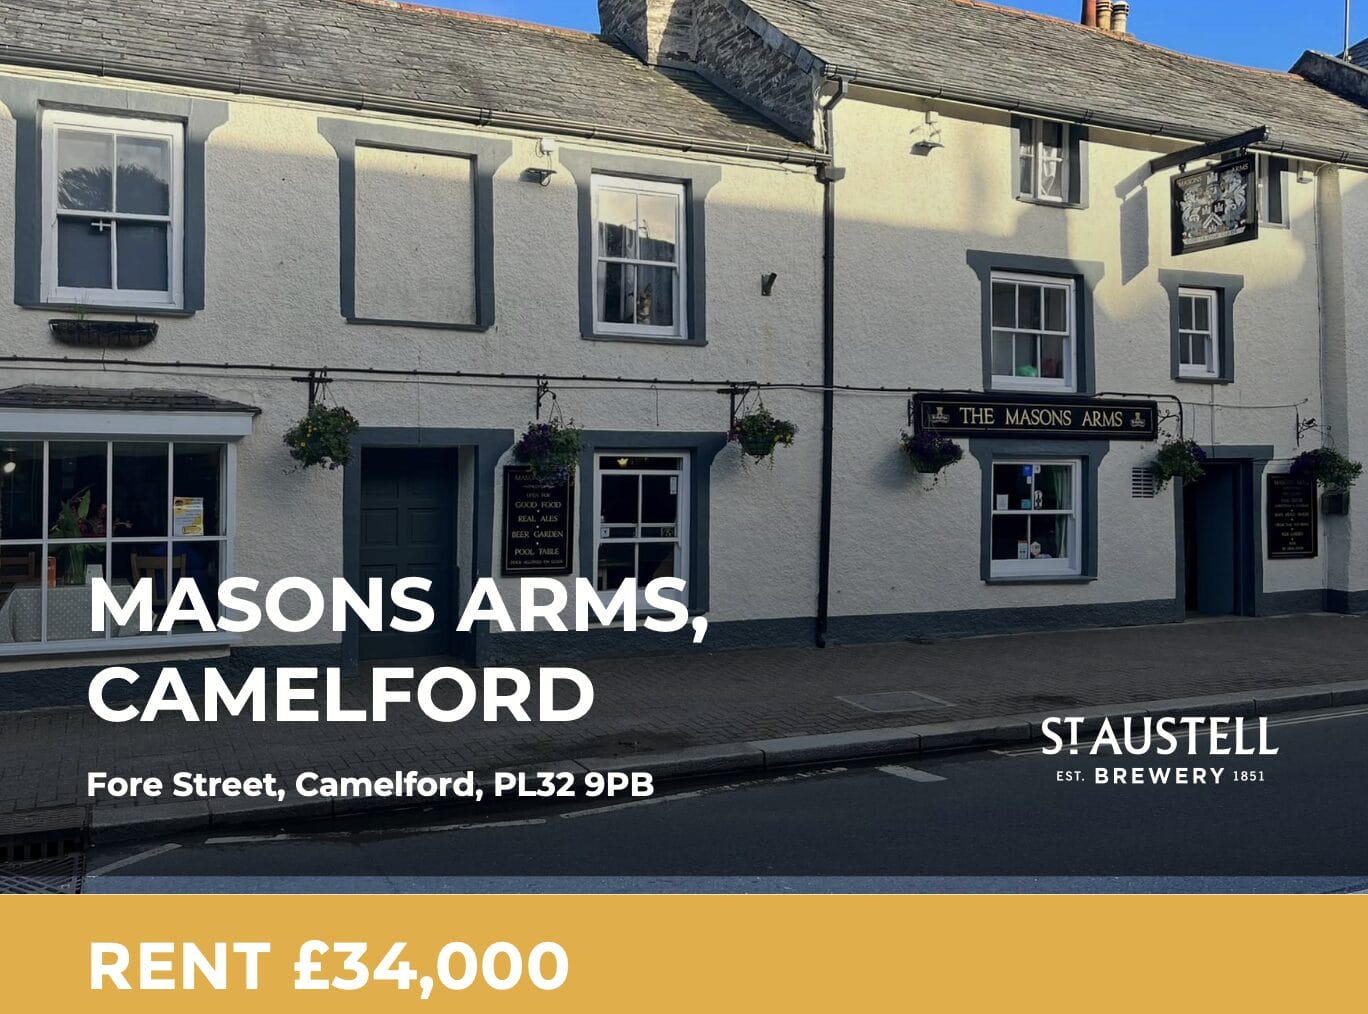 The Masons Arms Camelford